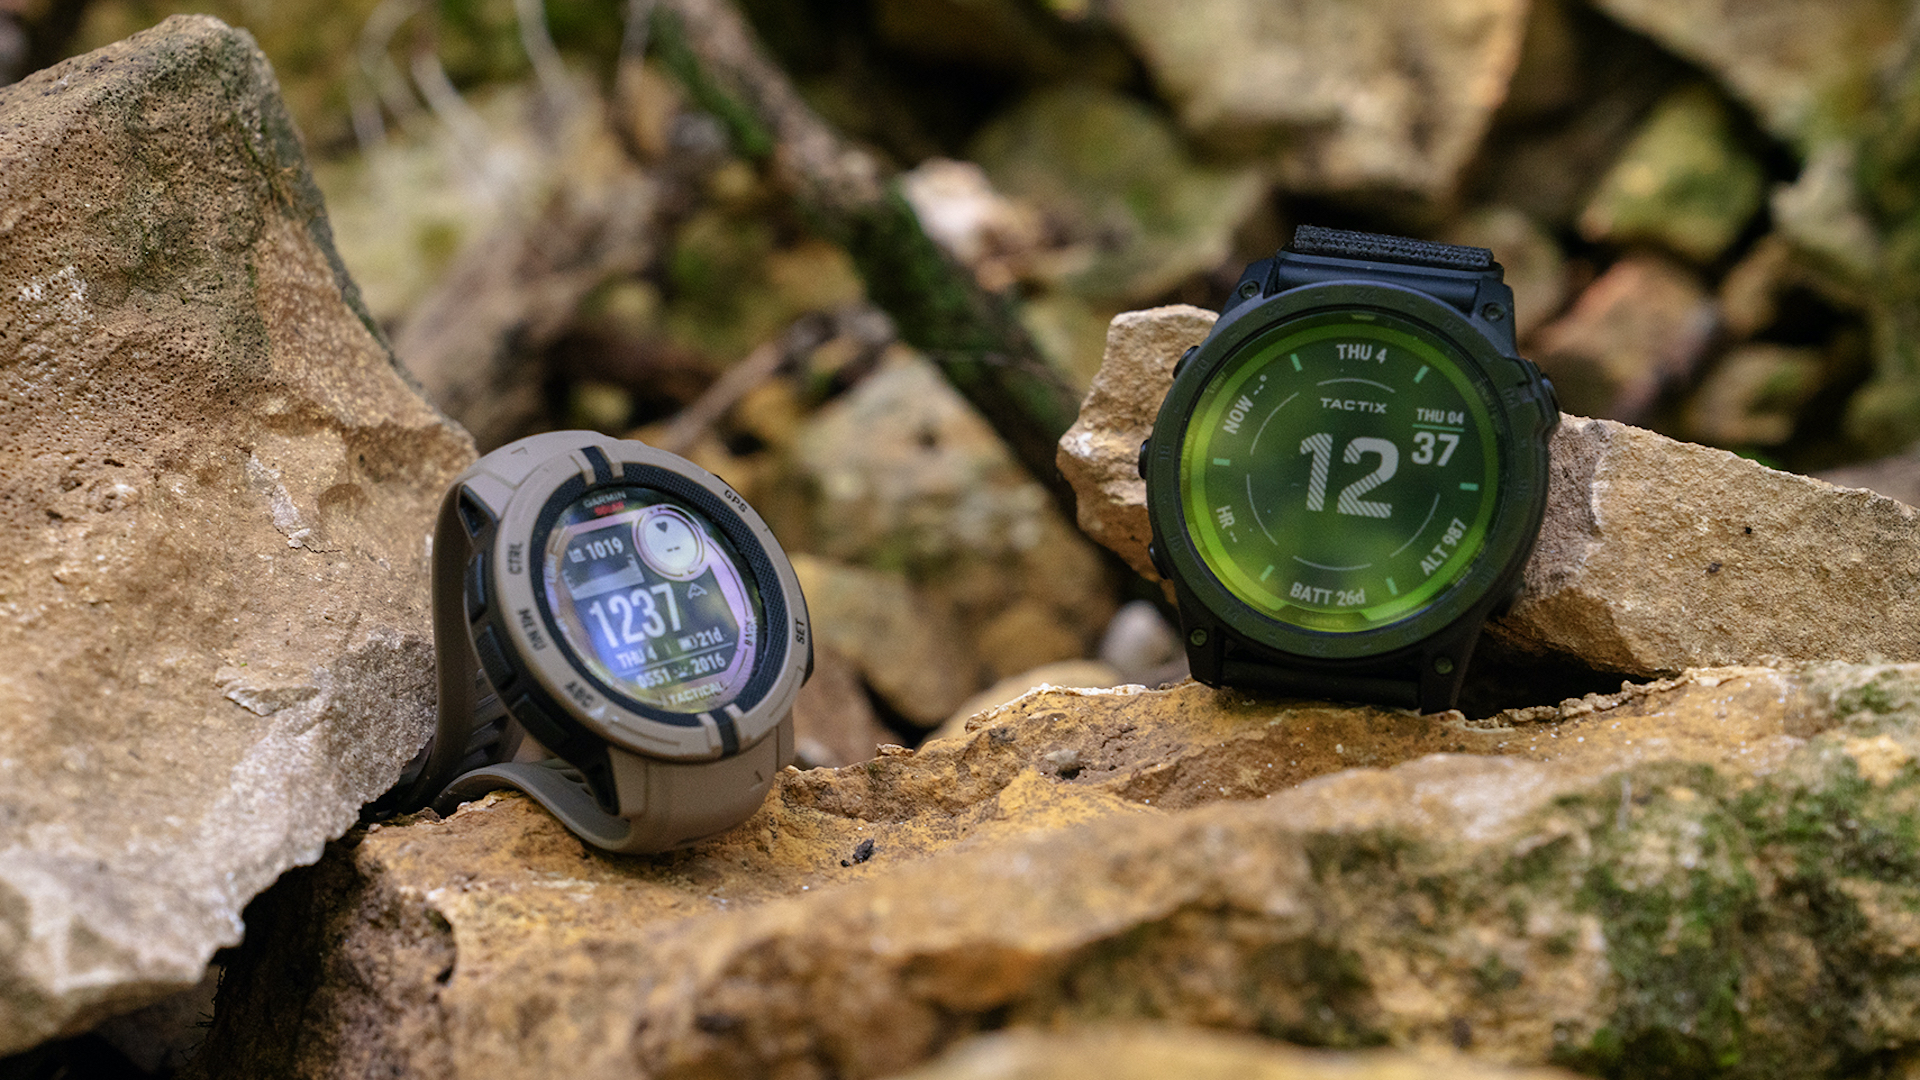 Festive Sales: Garmin India rolls out discount offers on Select Wellness,  Fitness & Golf GPS Smartwatches; details | Technology & Science News, Times  Now